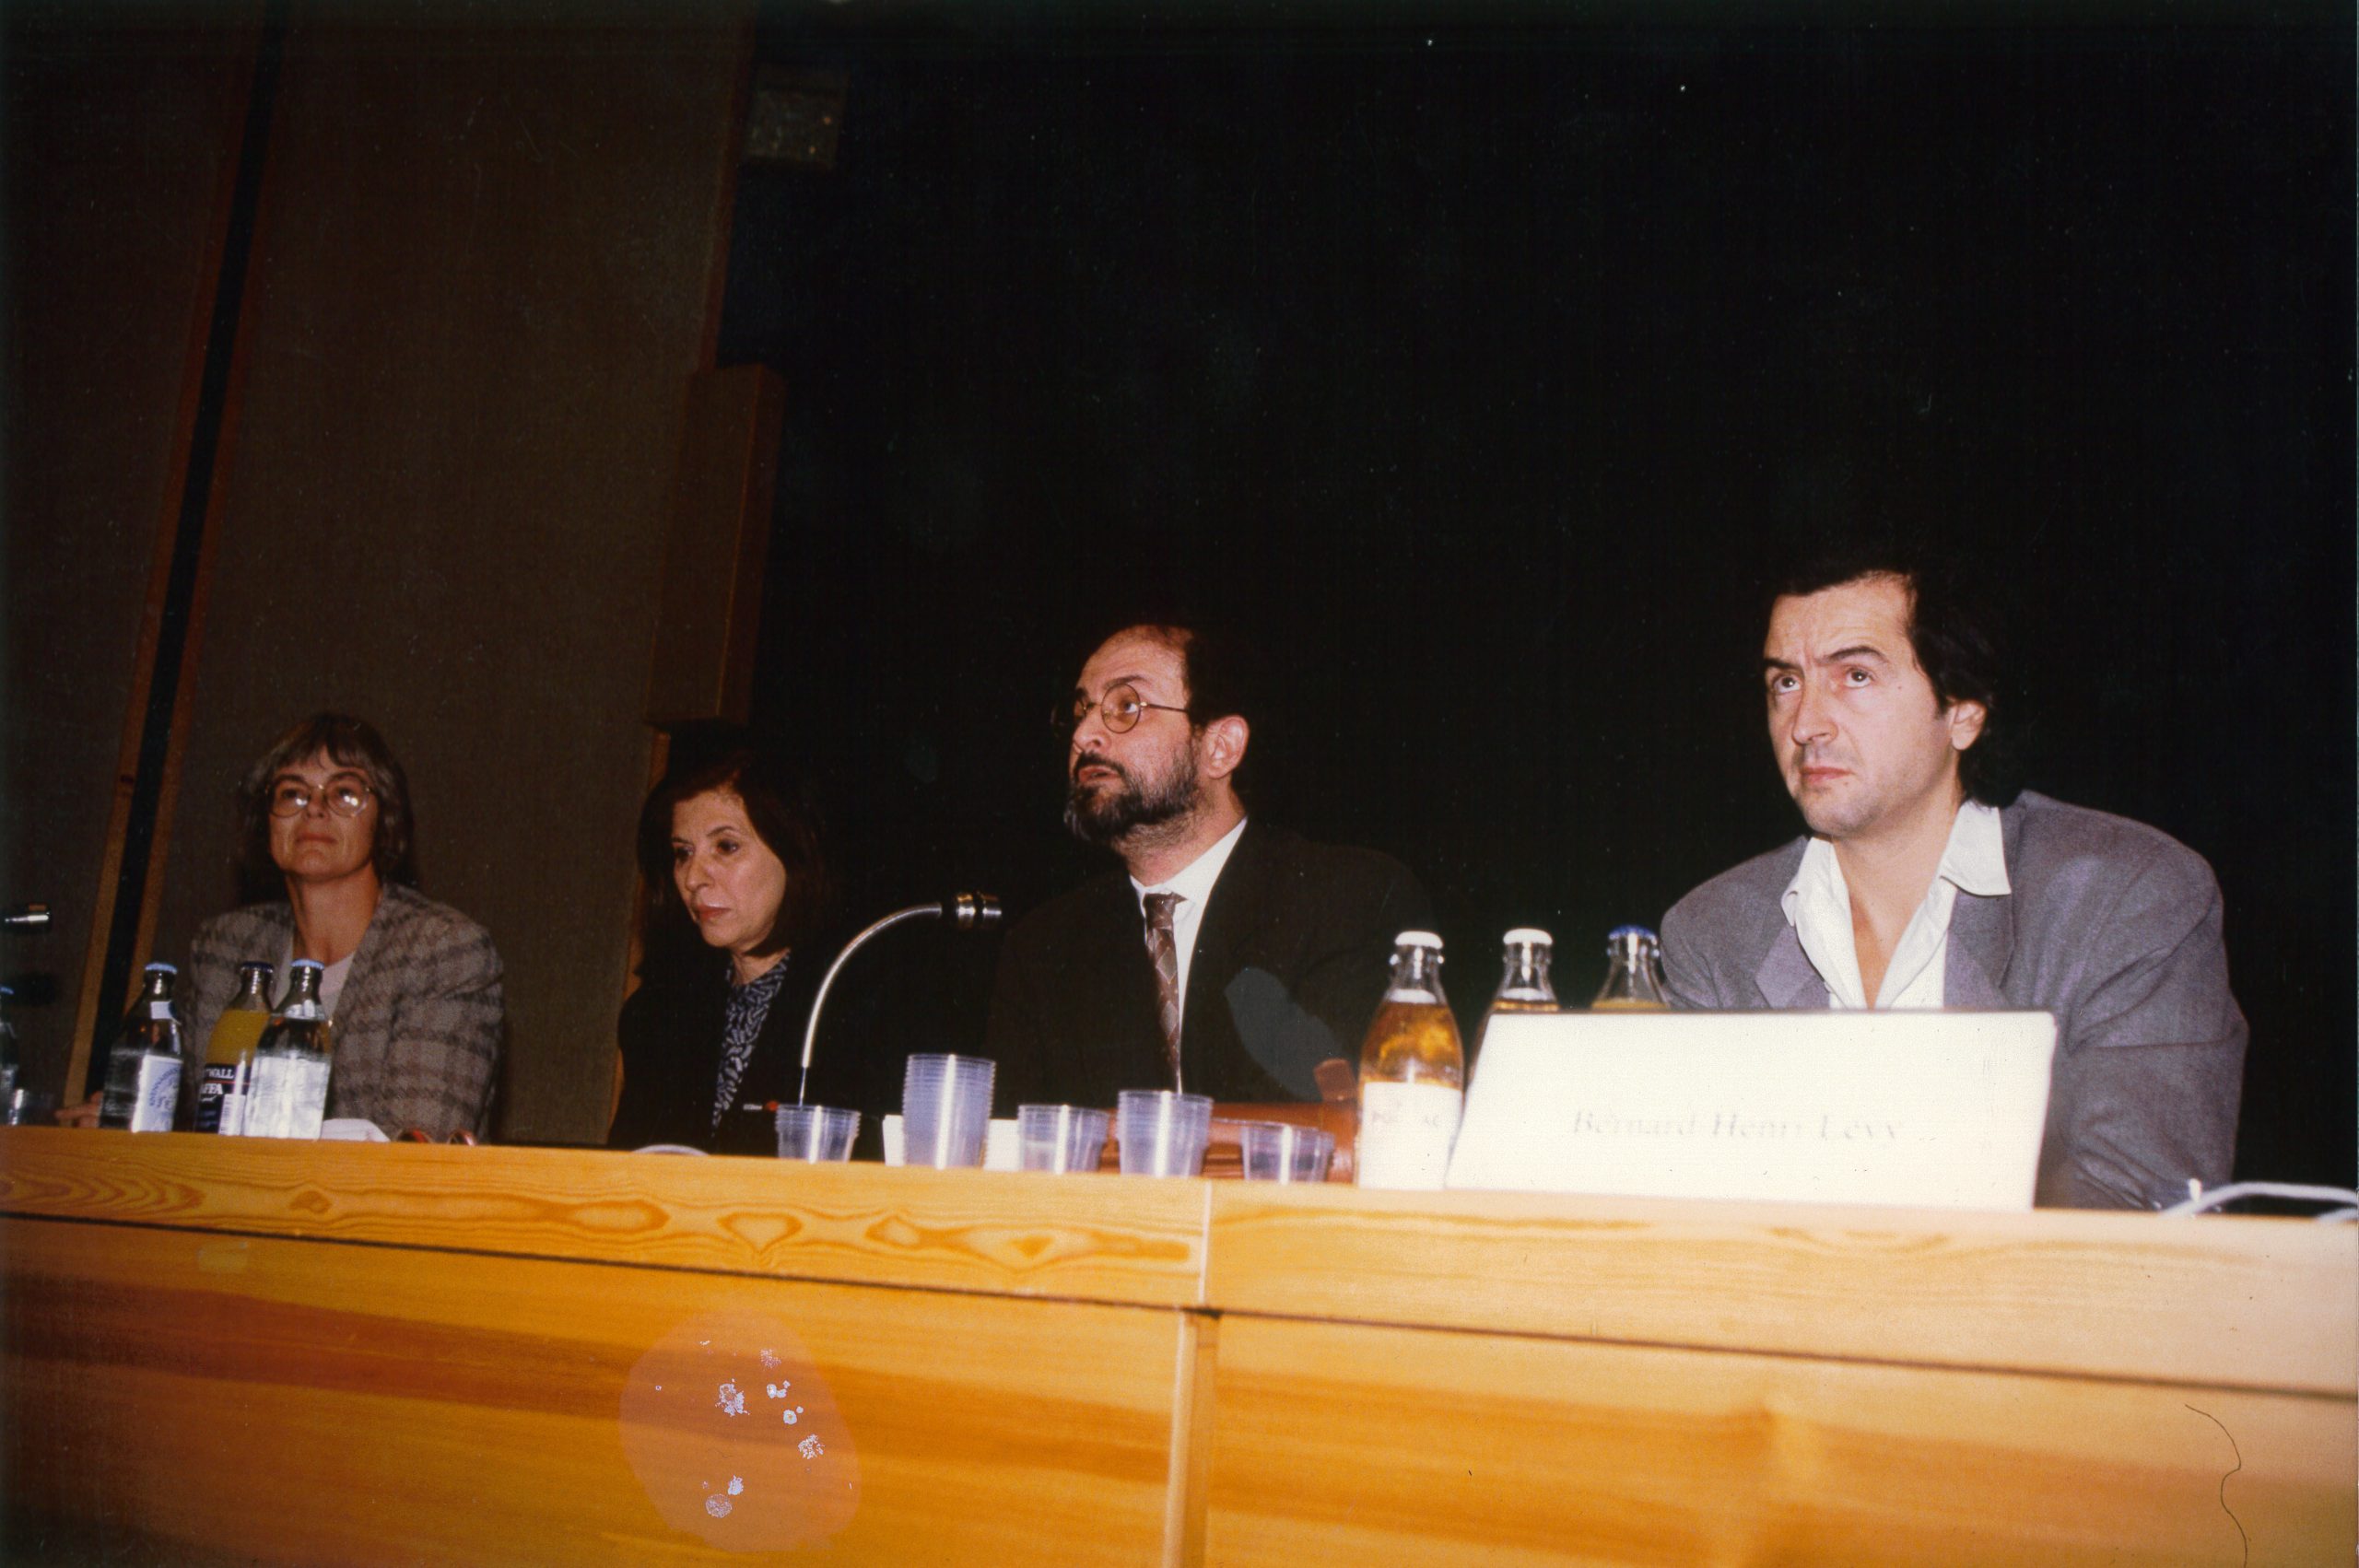 Bernard-Henri Lévy and Salman Rushdie in Helsinki in October 1992, during a conference